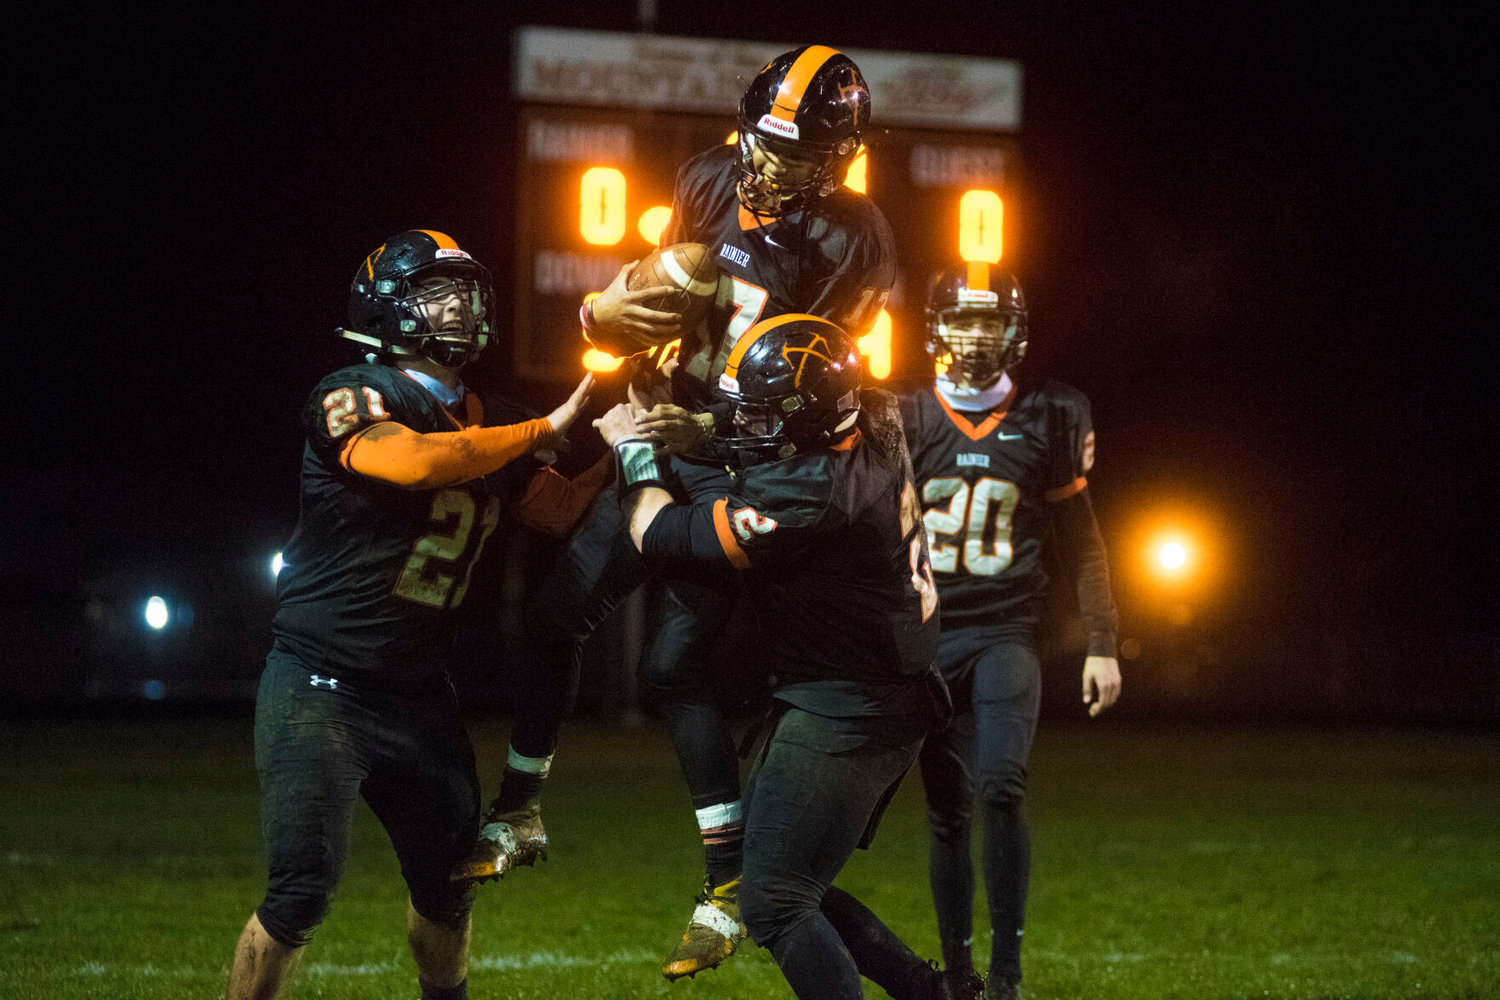 Rainier's Jacob Uch gets lifted up by teammates after catching a 40-yard touchdown pass against Adna on Friday.